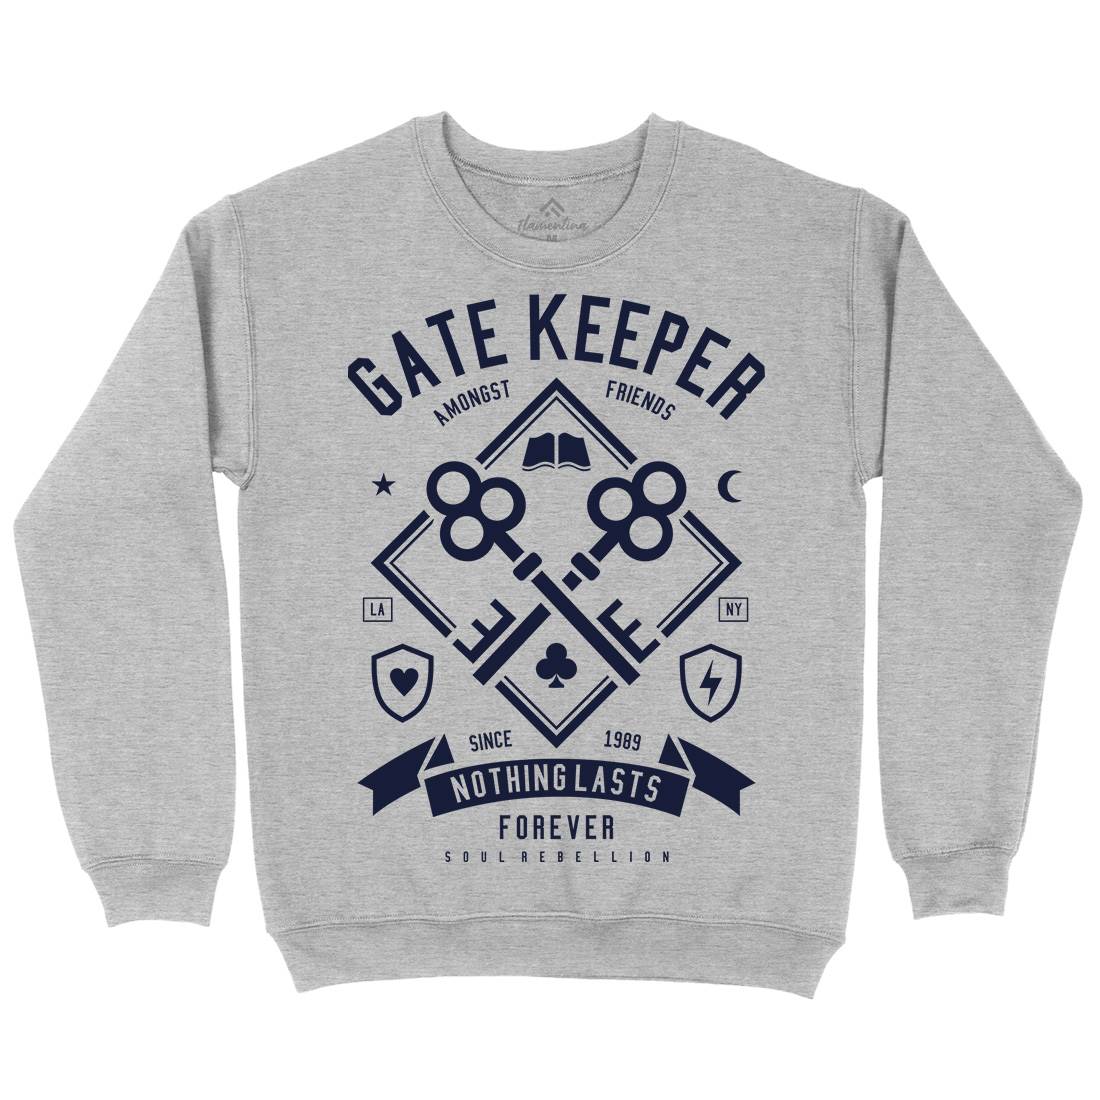 Gate Keeper Mens Crew Neck Sweatshirt Quotes A232